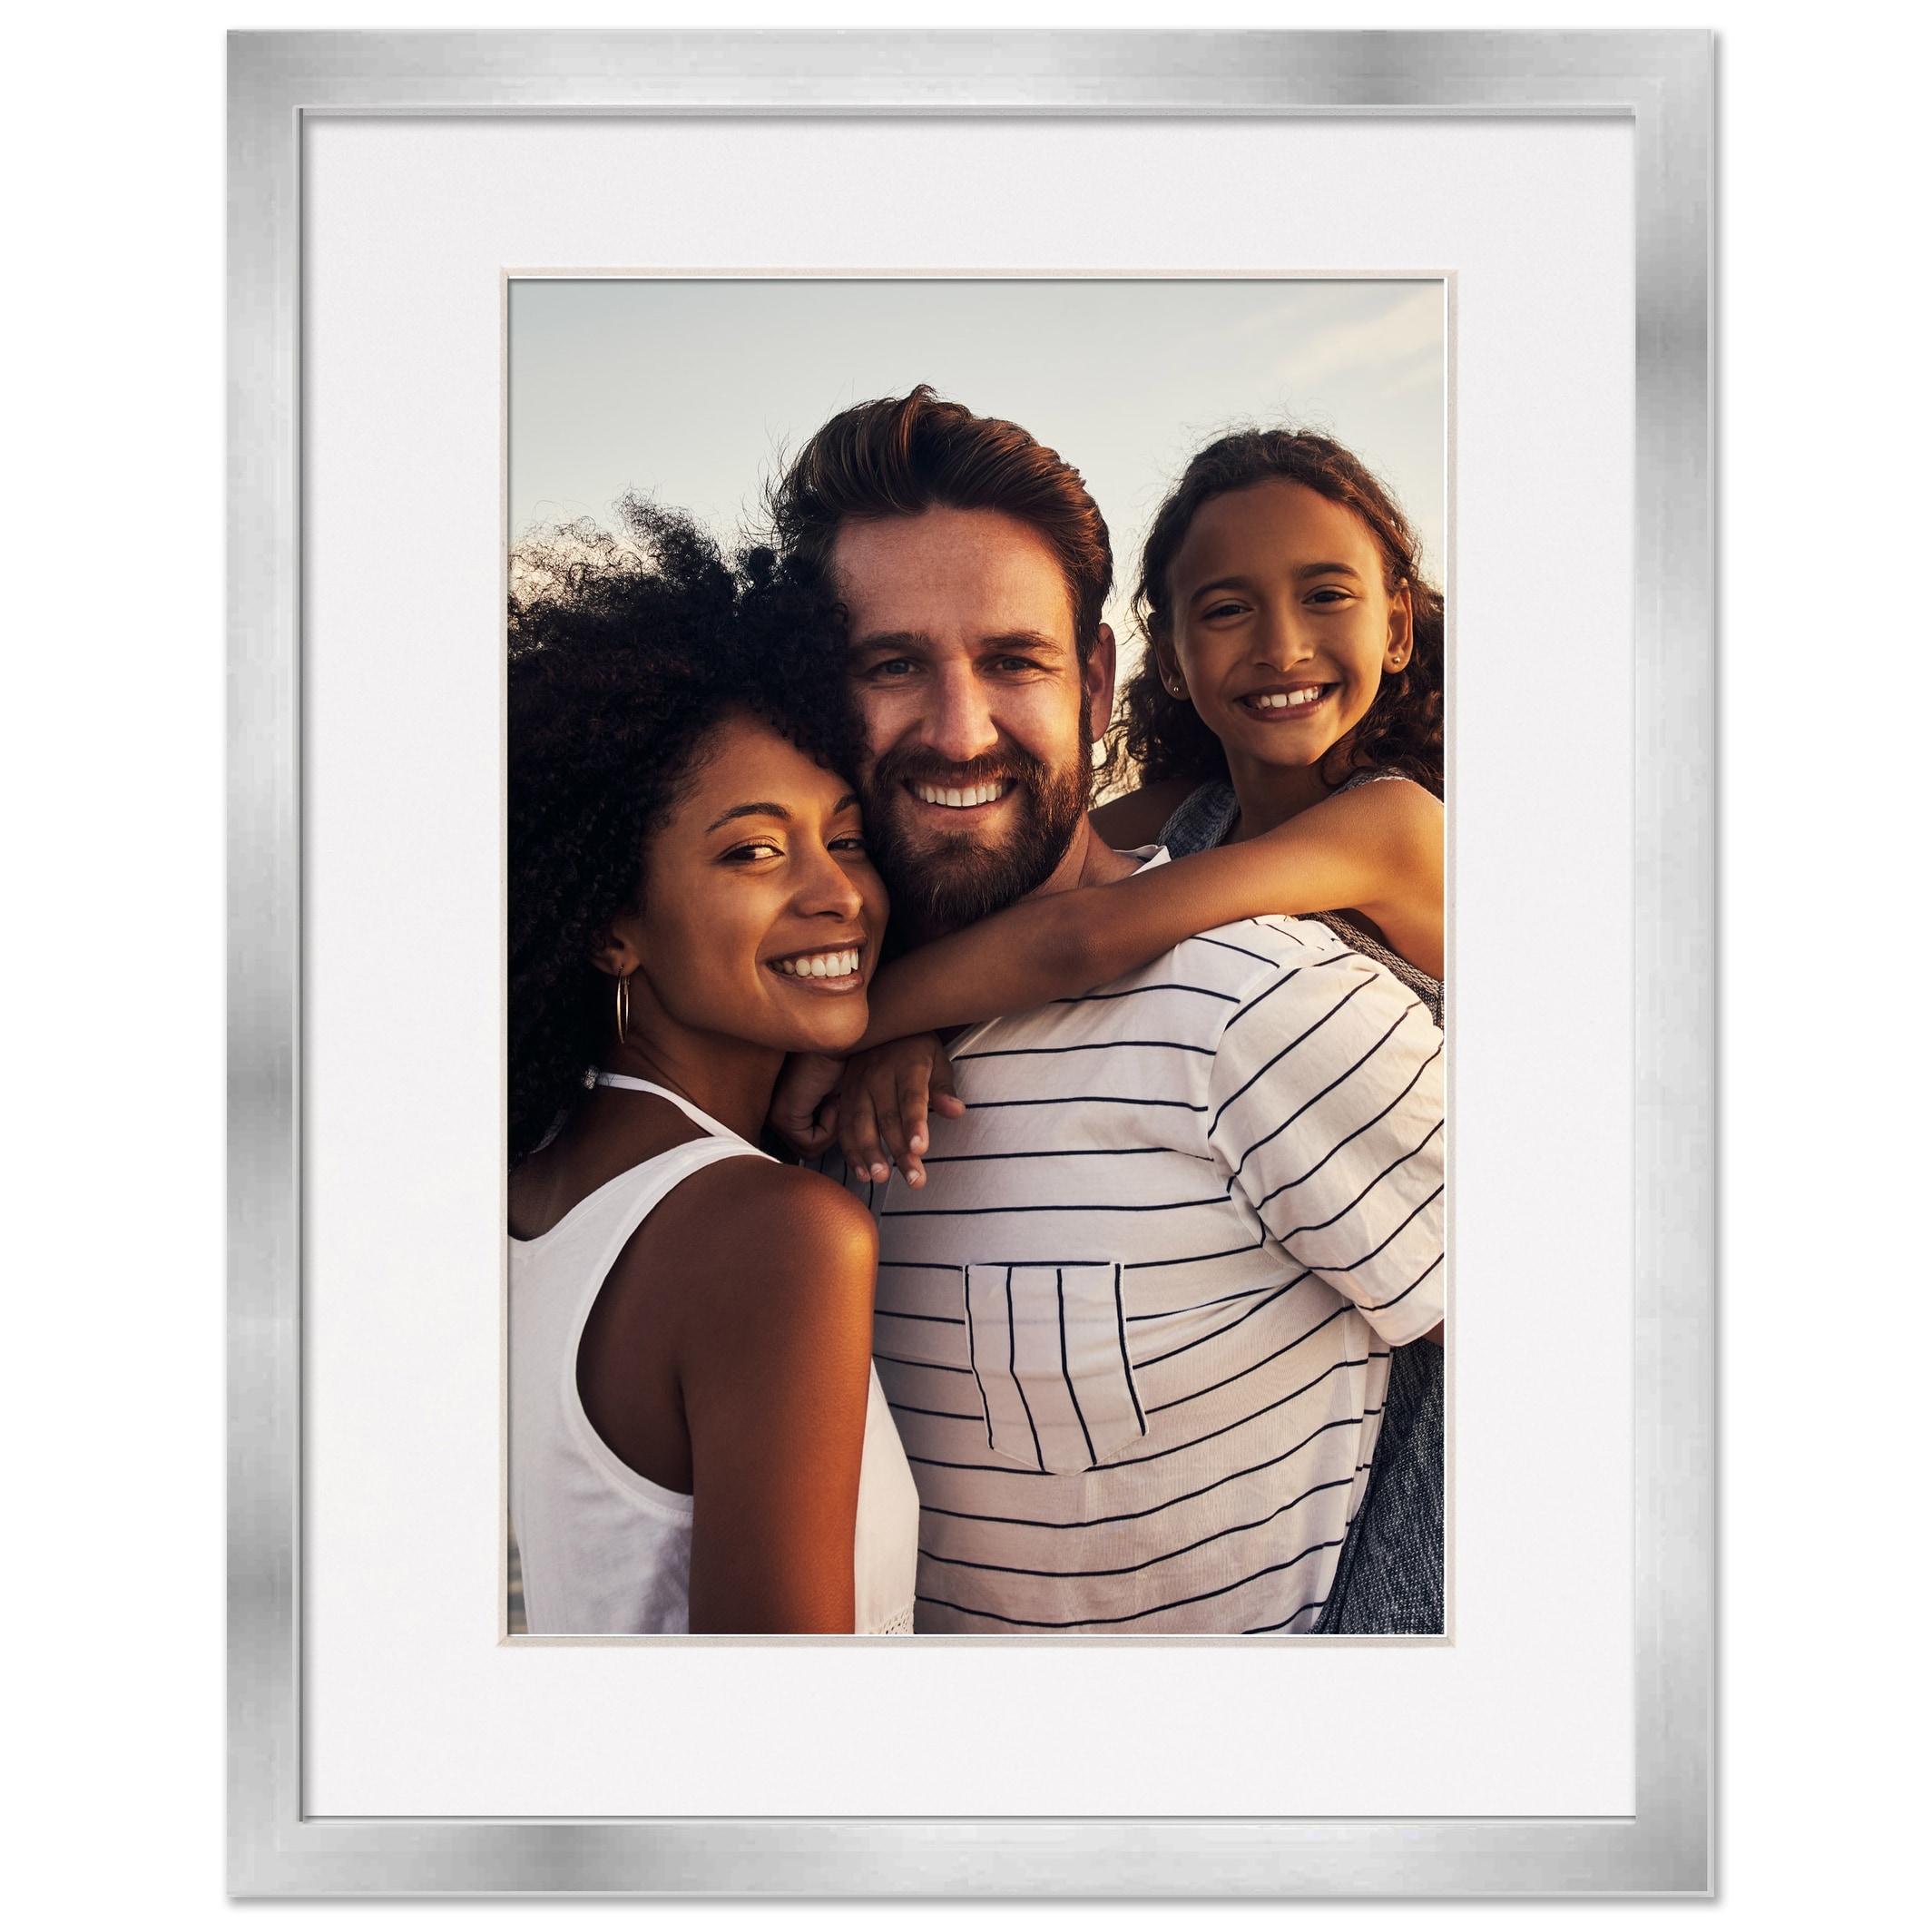 30x40 Frame with Mat - Black 32x42 Frame Wood Made to Display Print or  Poster Measuring 30 x 40 Inches with Black Photo Mat